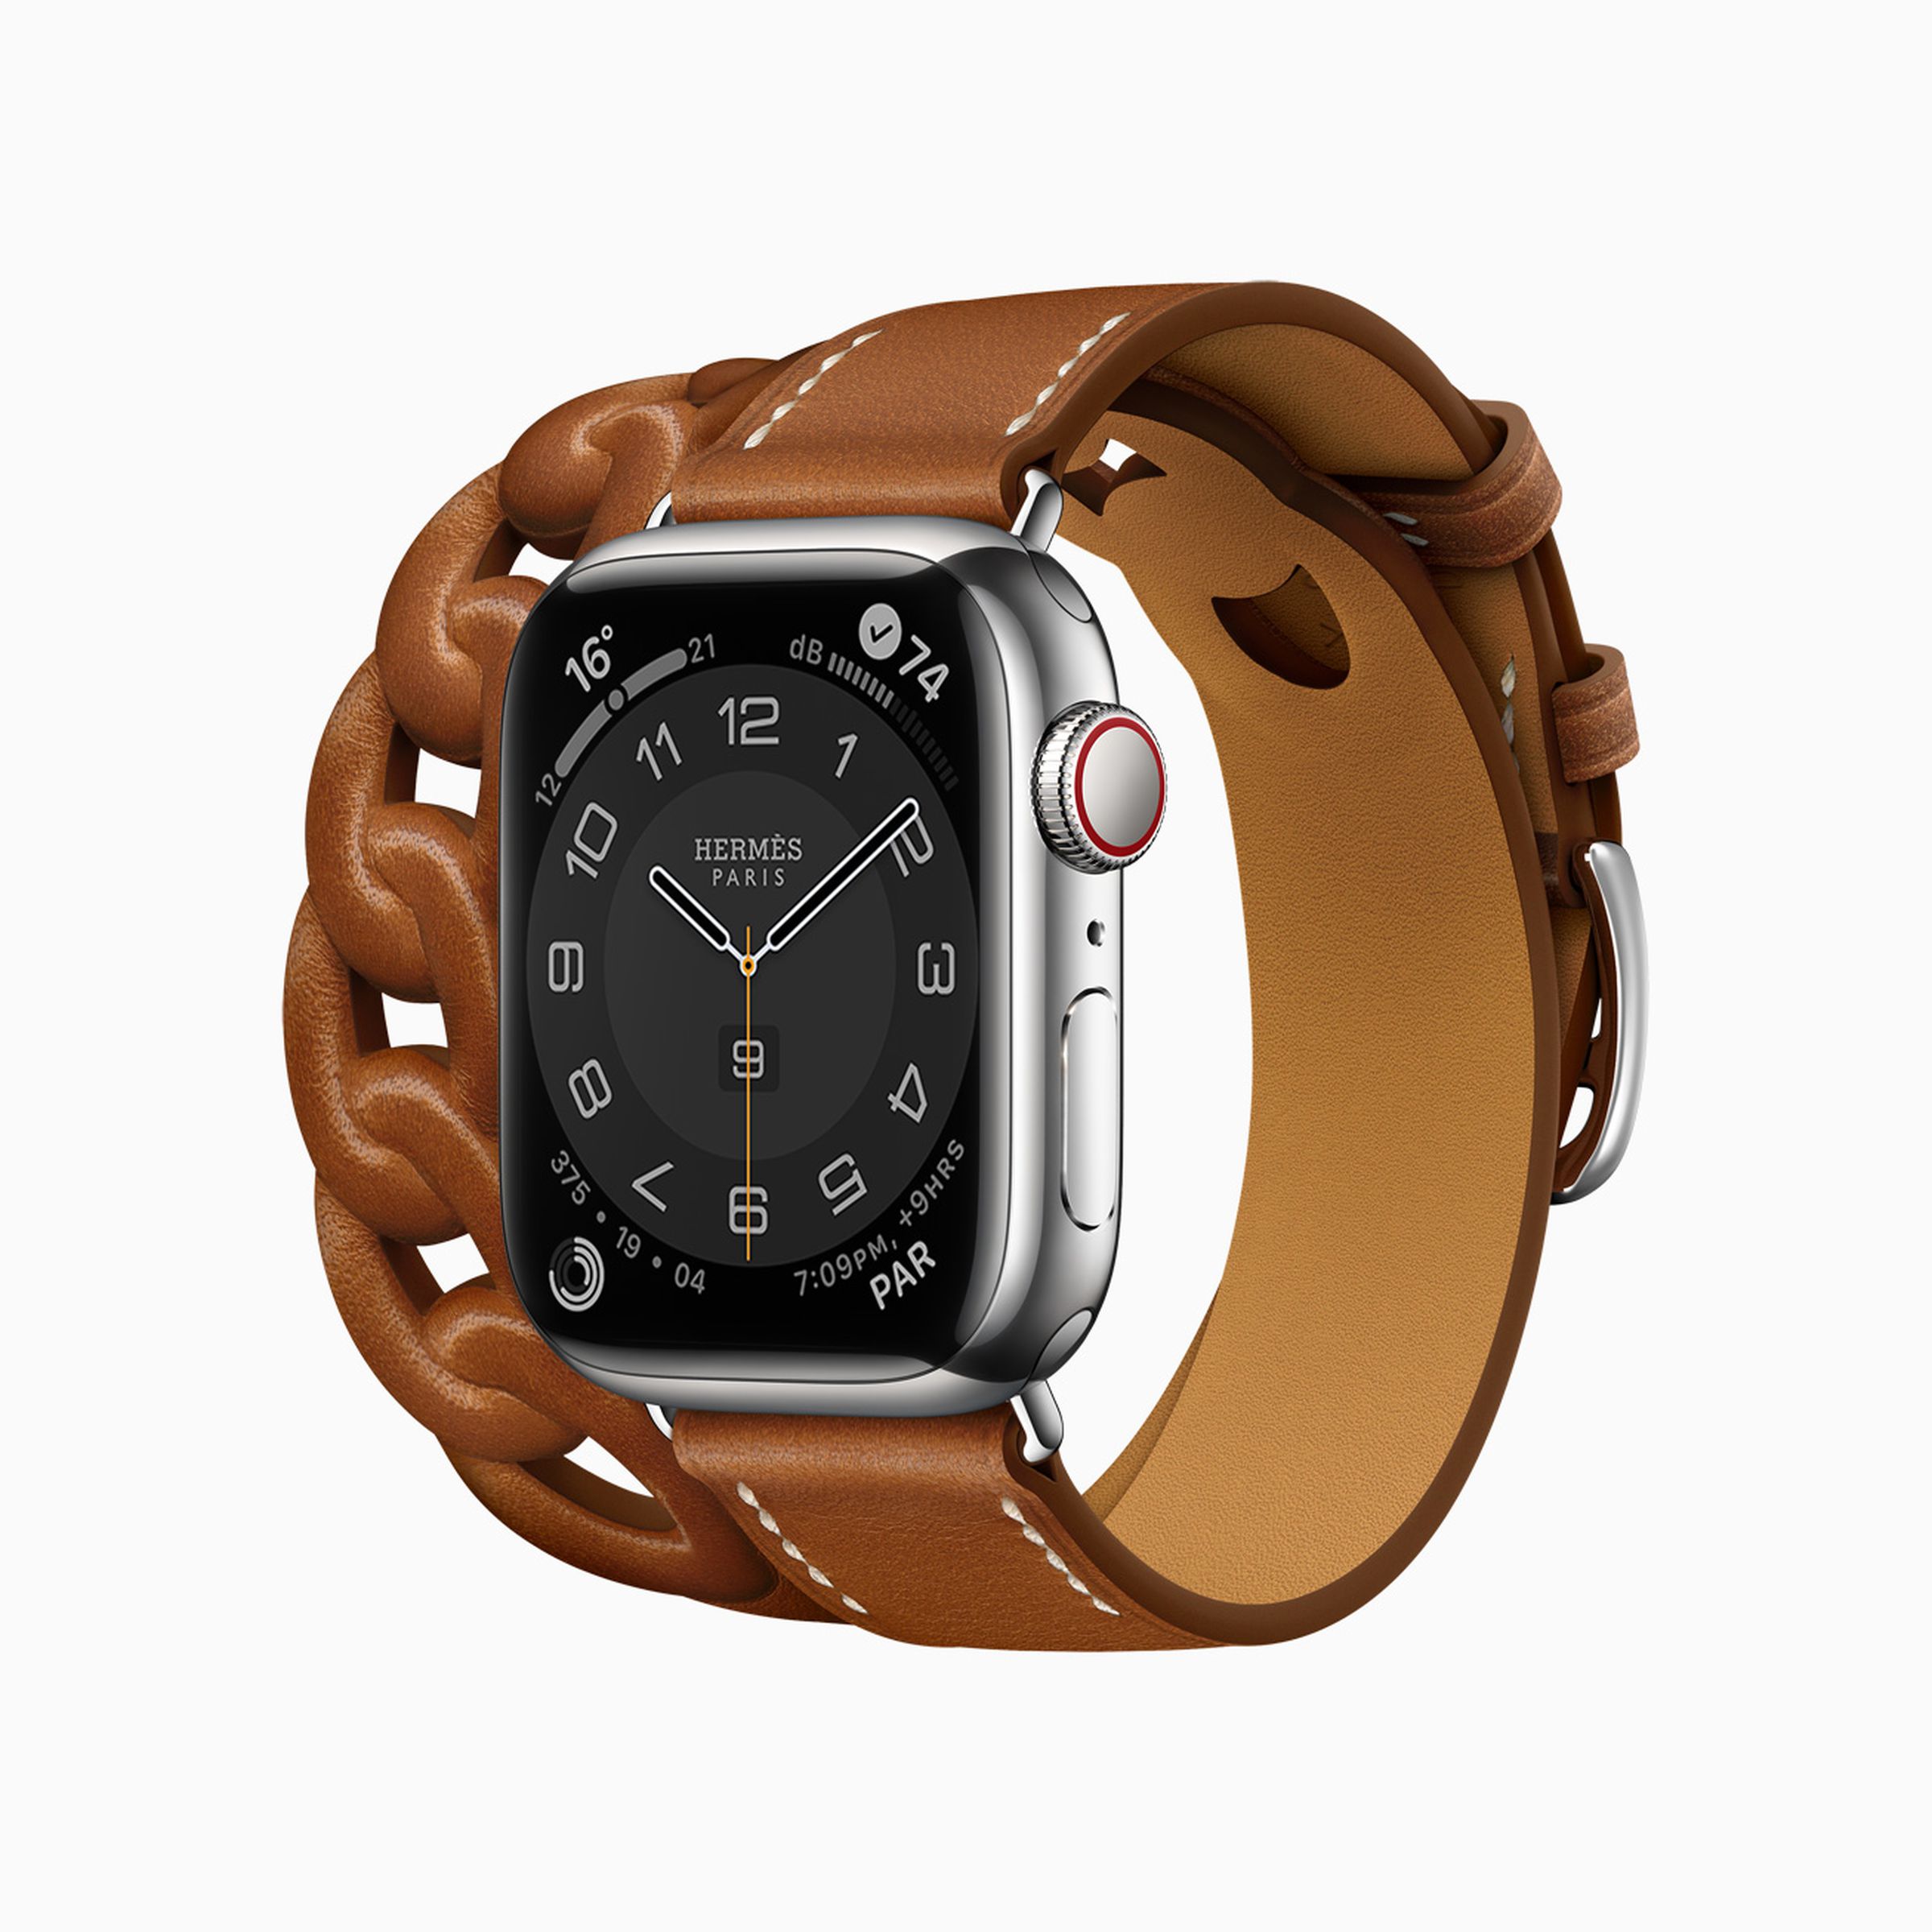 Apple Watch Edition with Hermès strap.